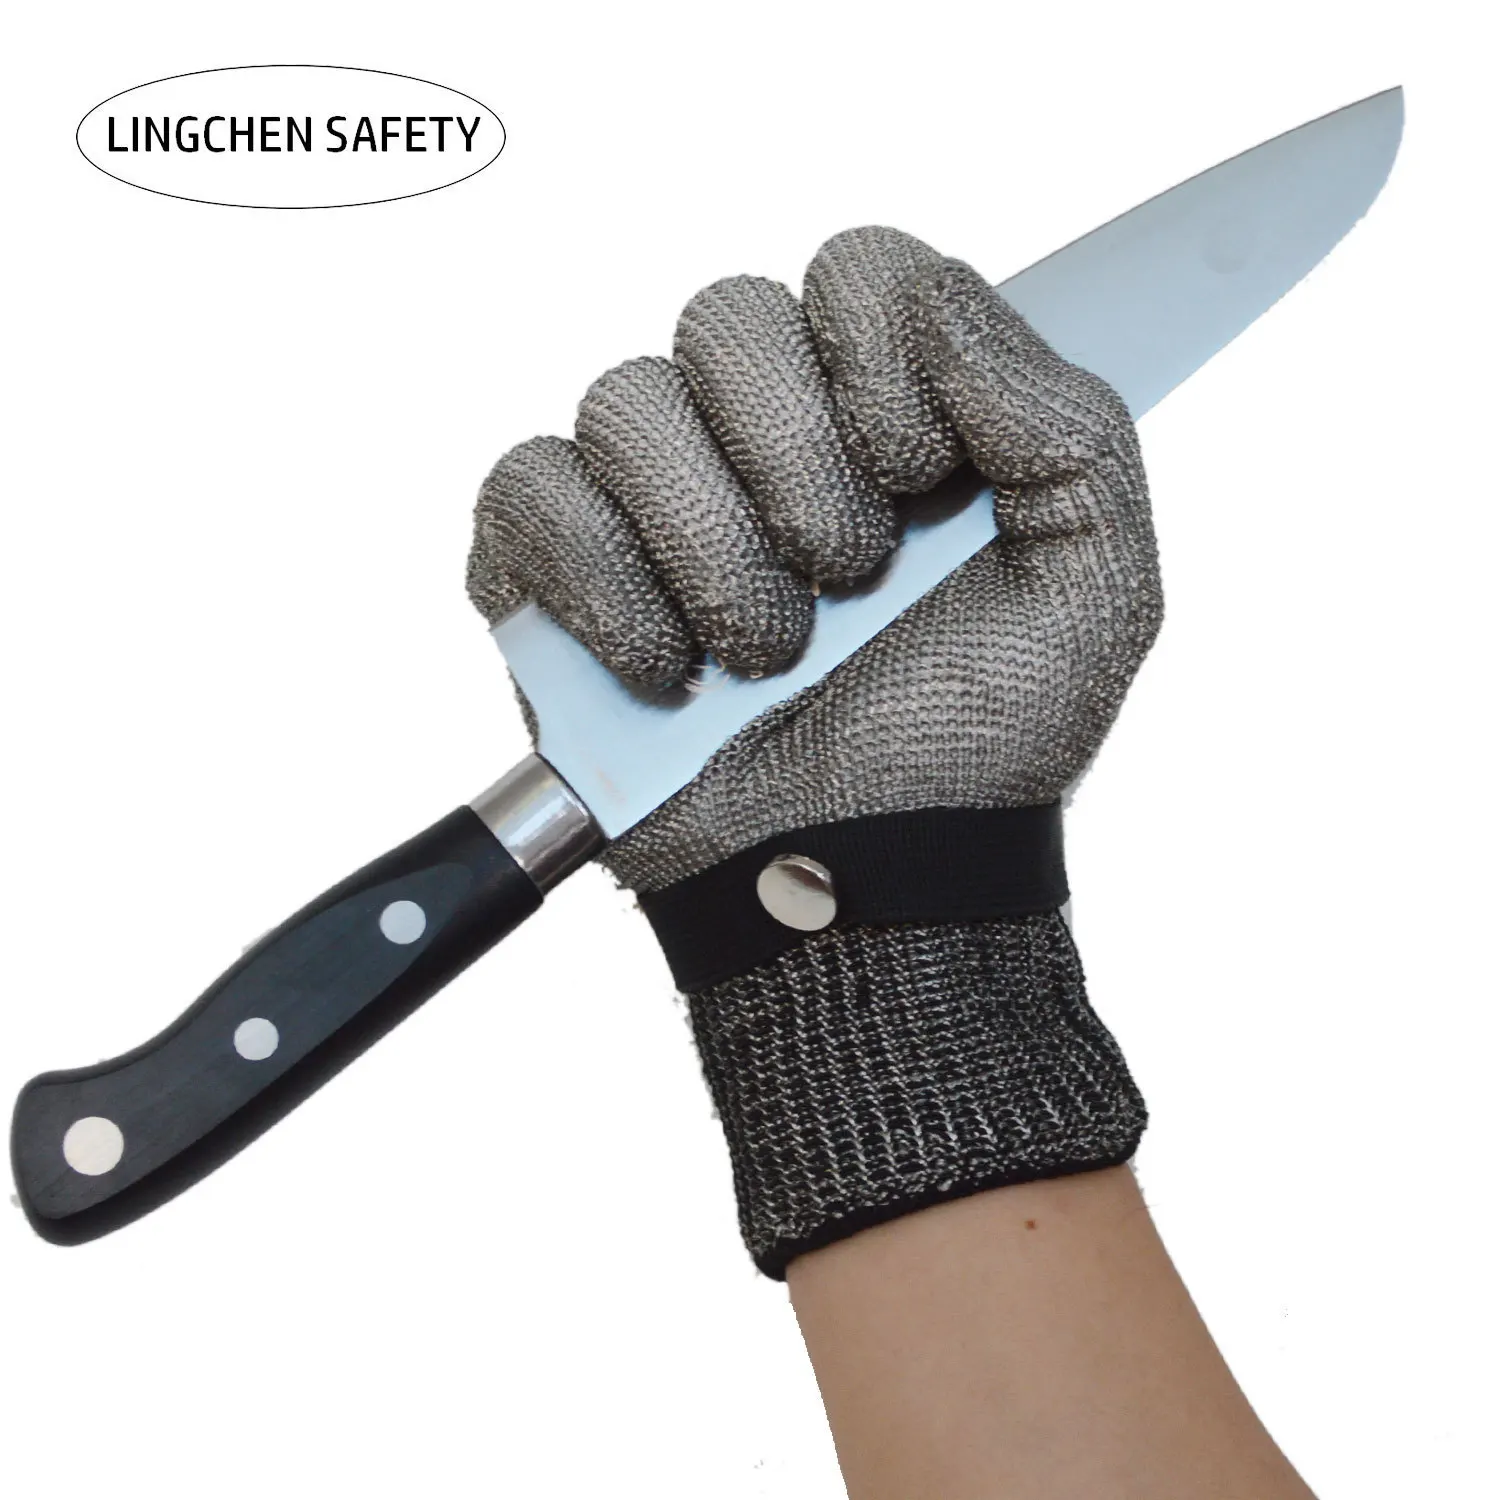 

1 Pcs Grade 5 Stainless Steel Wire Gloves Kitchen Butcher Oyster Peel Fish Gardening Slaughtering Chainsaw Anti Cut Safety Glove